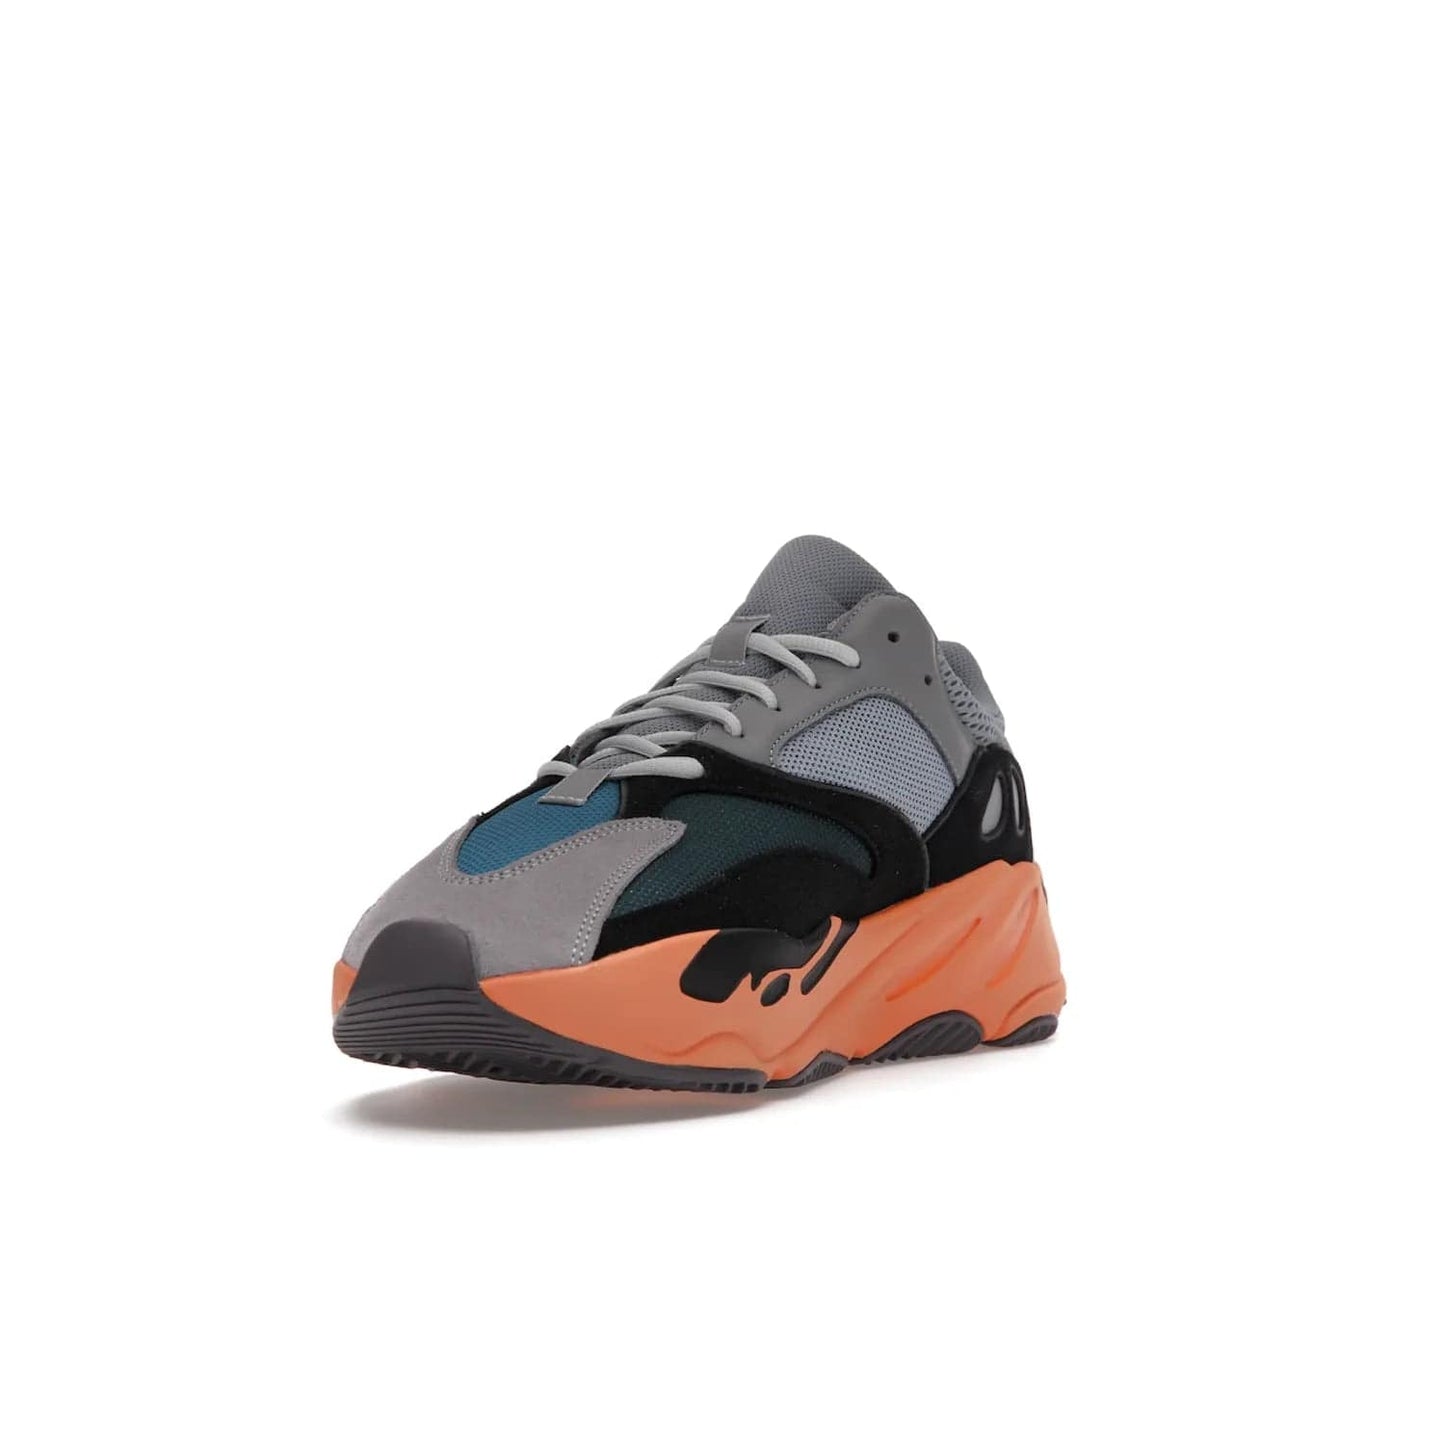 adidas Yeezy Boost 700 Wash Orange - Image 13 - Only at www.BallersClubKickz.com - Introducing the adidas Yeezy Boost 700 Wash Orange. Unique grey leather, suede, mesh upper and teal panels with a chunky Wash Orange Boost midsole. Release October 2021, make a statement today!